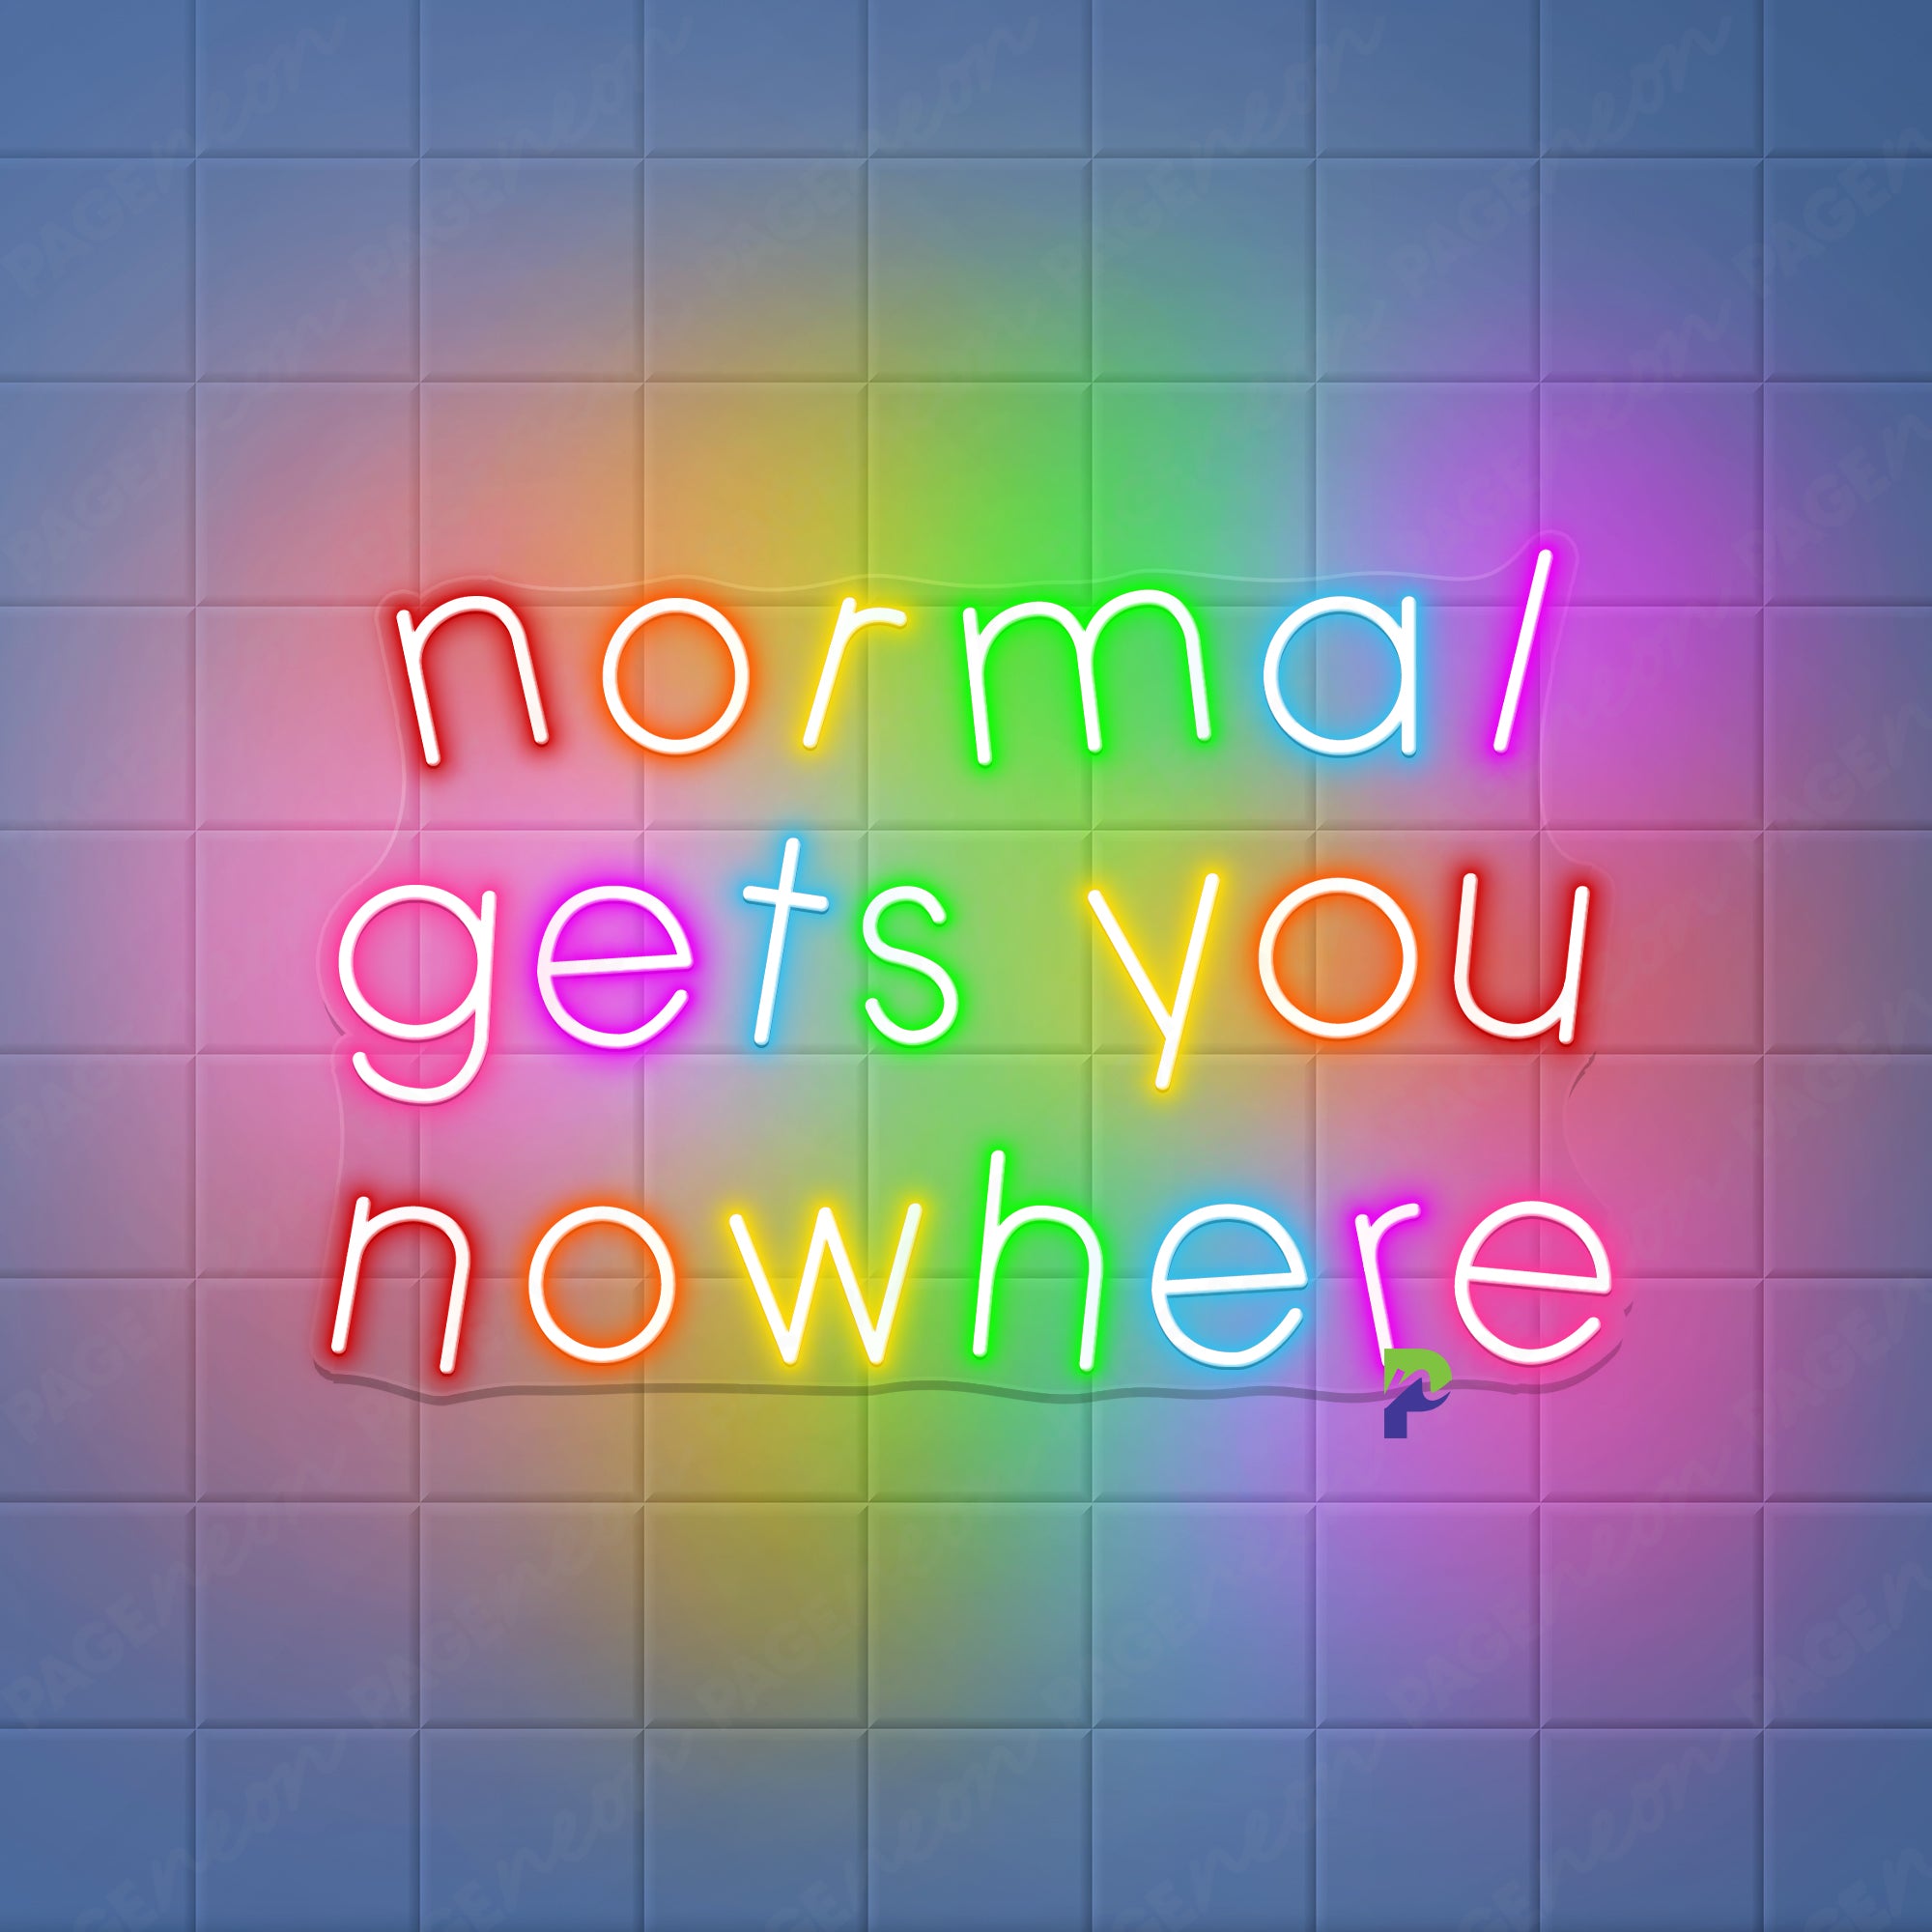 Normal Gets You Nowhere Neon Sign Inspirational Led Light